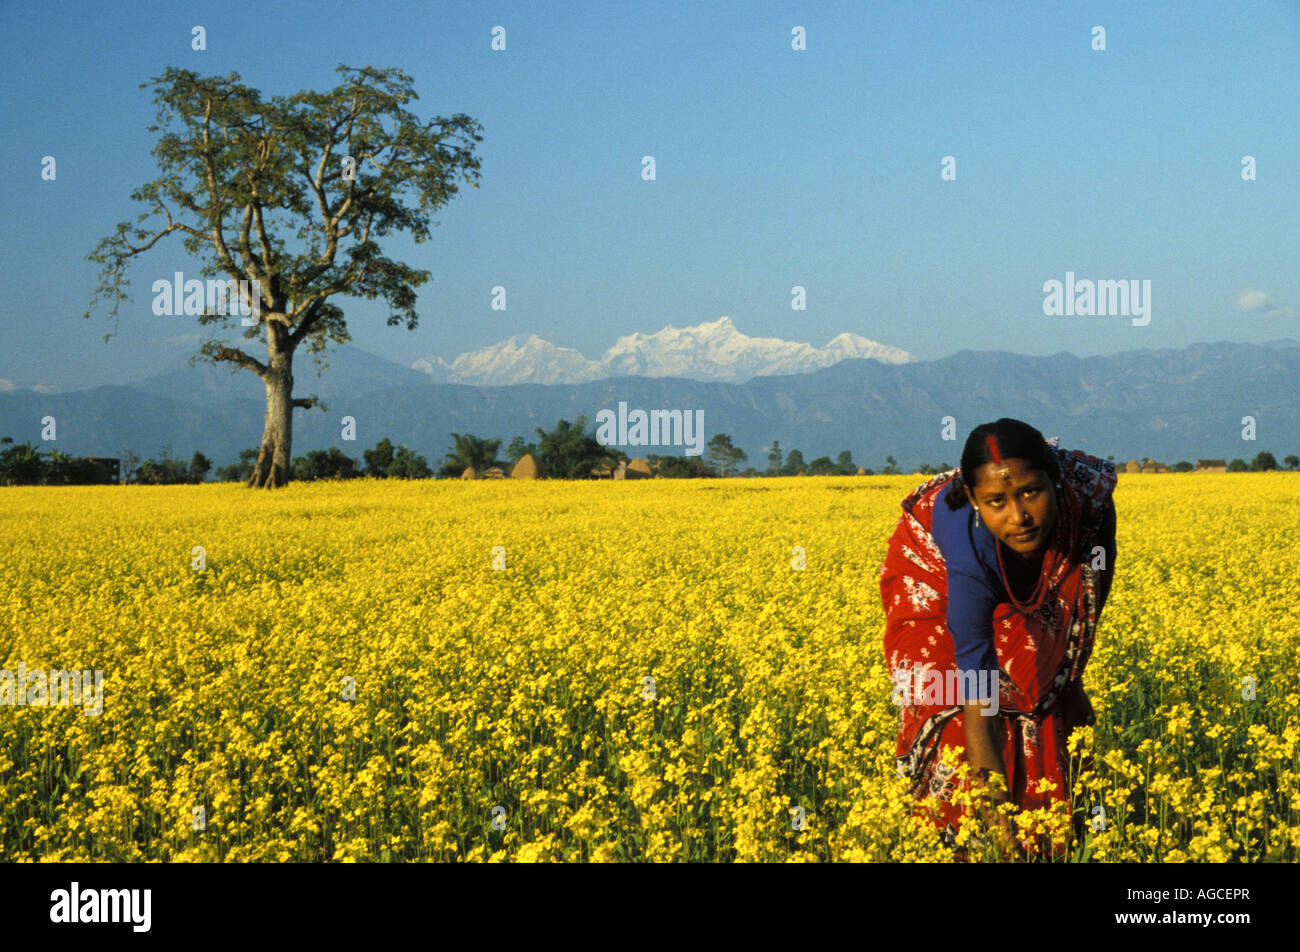 Nepal Bhairawa Woman in mustard seed field with snow covered Himalaya mountains in background Stock Photo